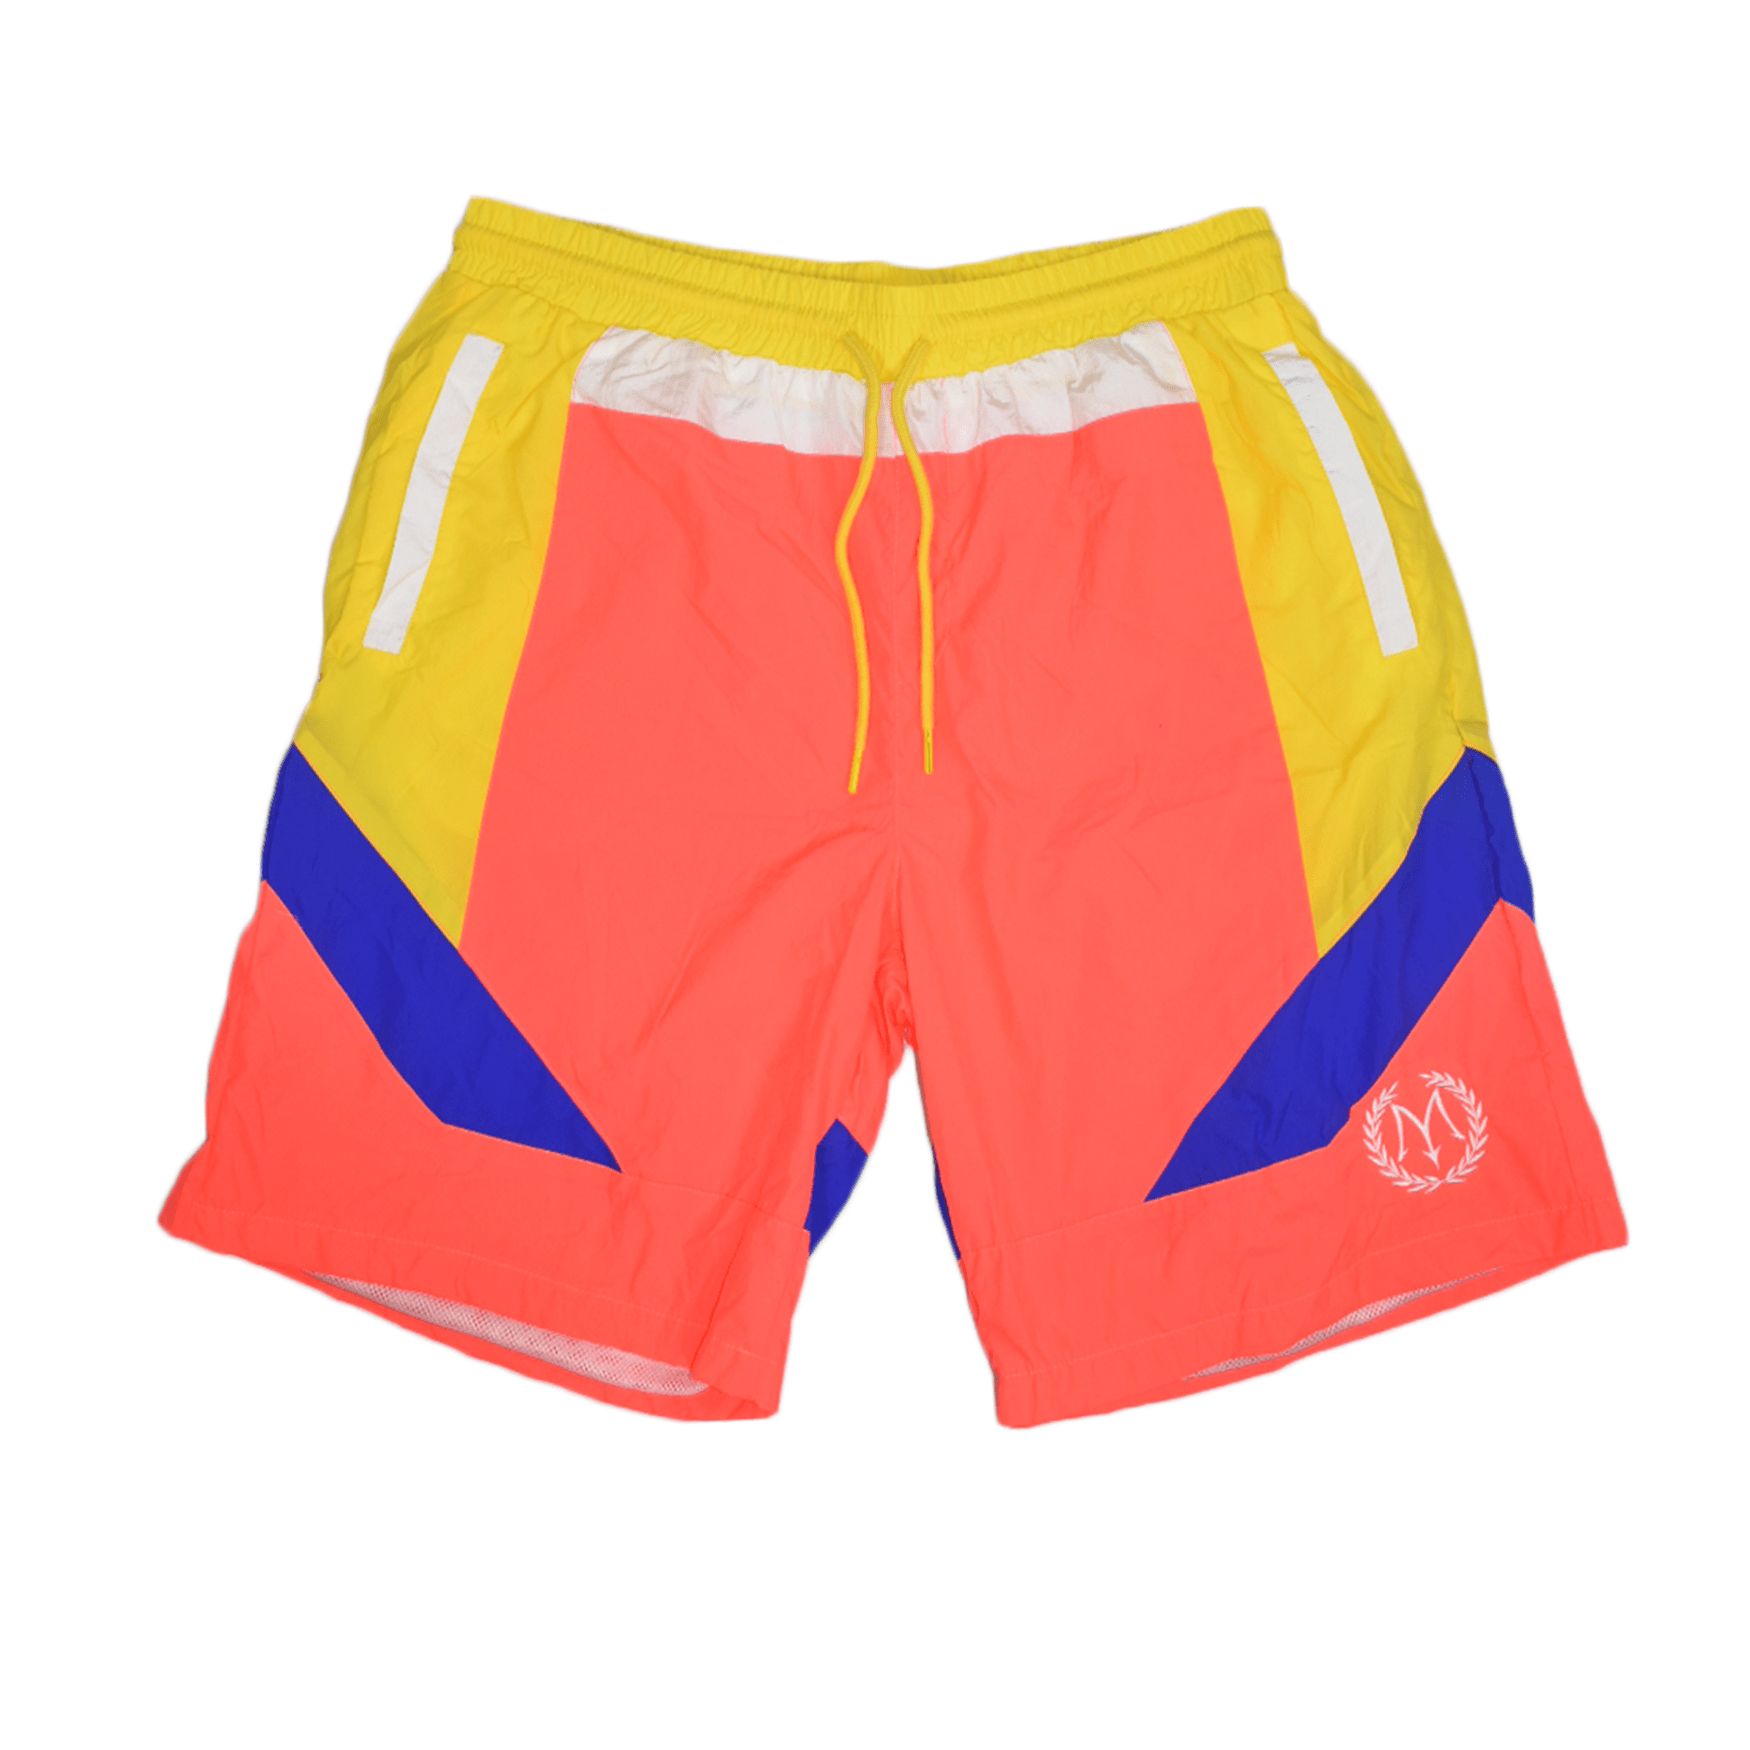 Mastermind315 Orchid surf shorts